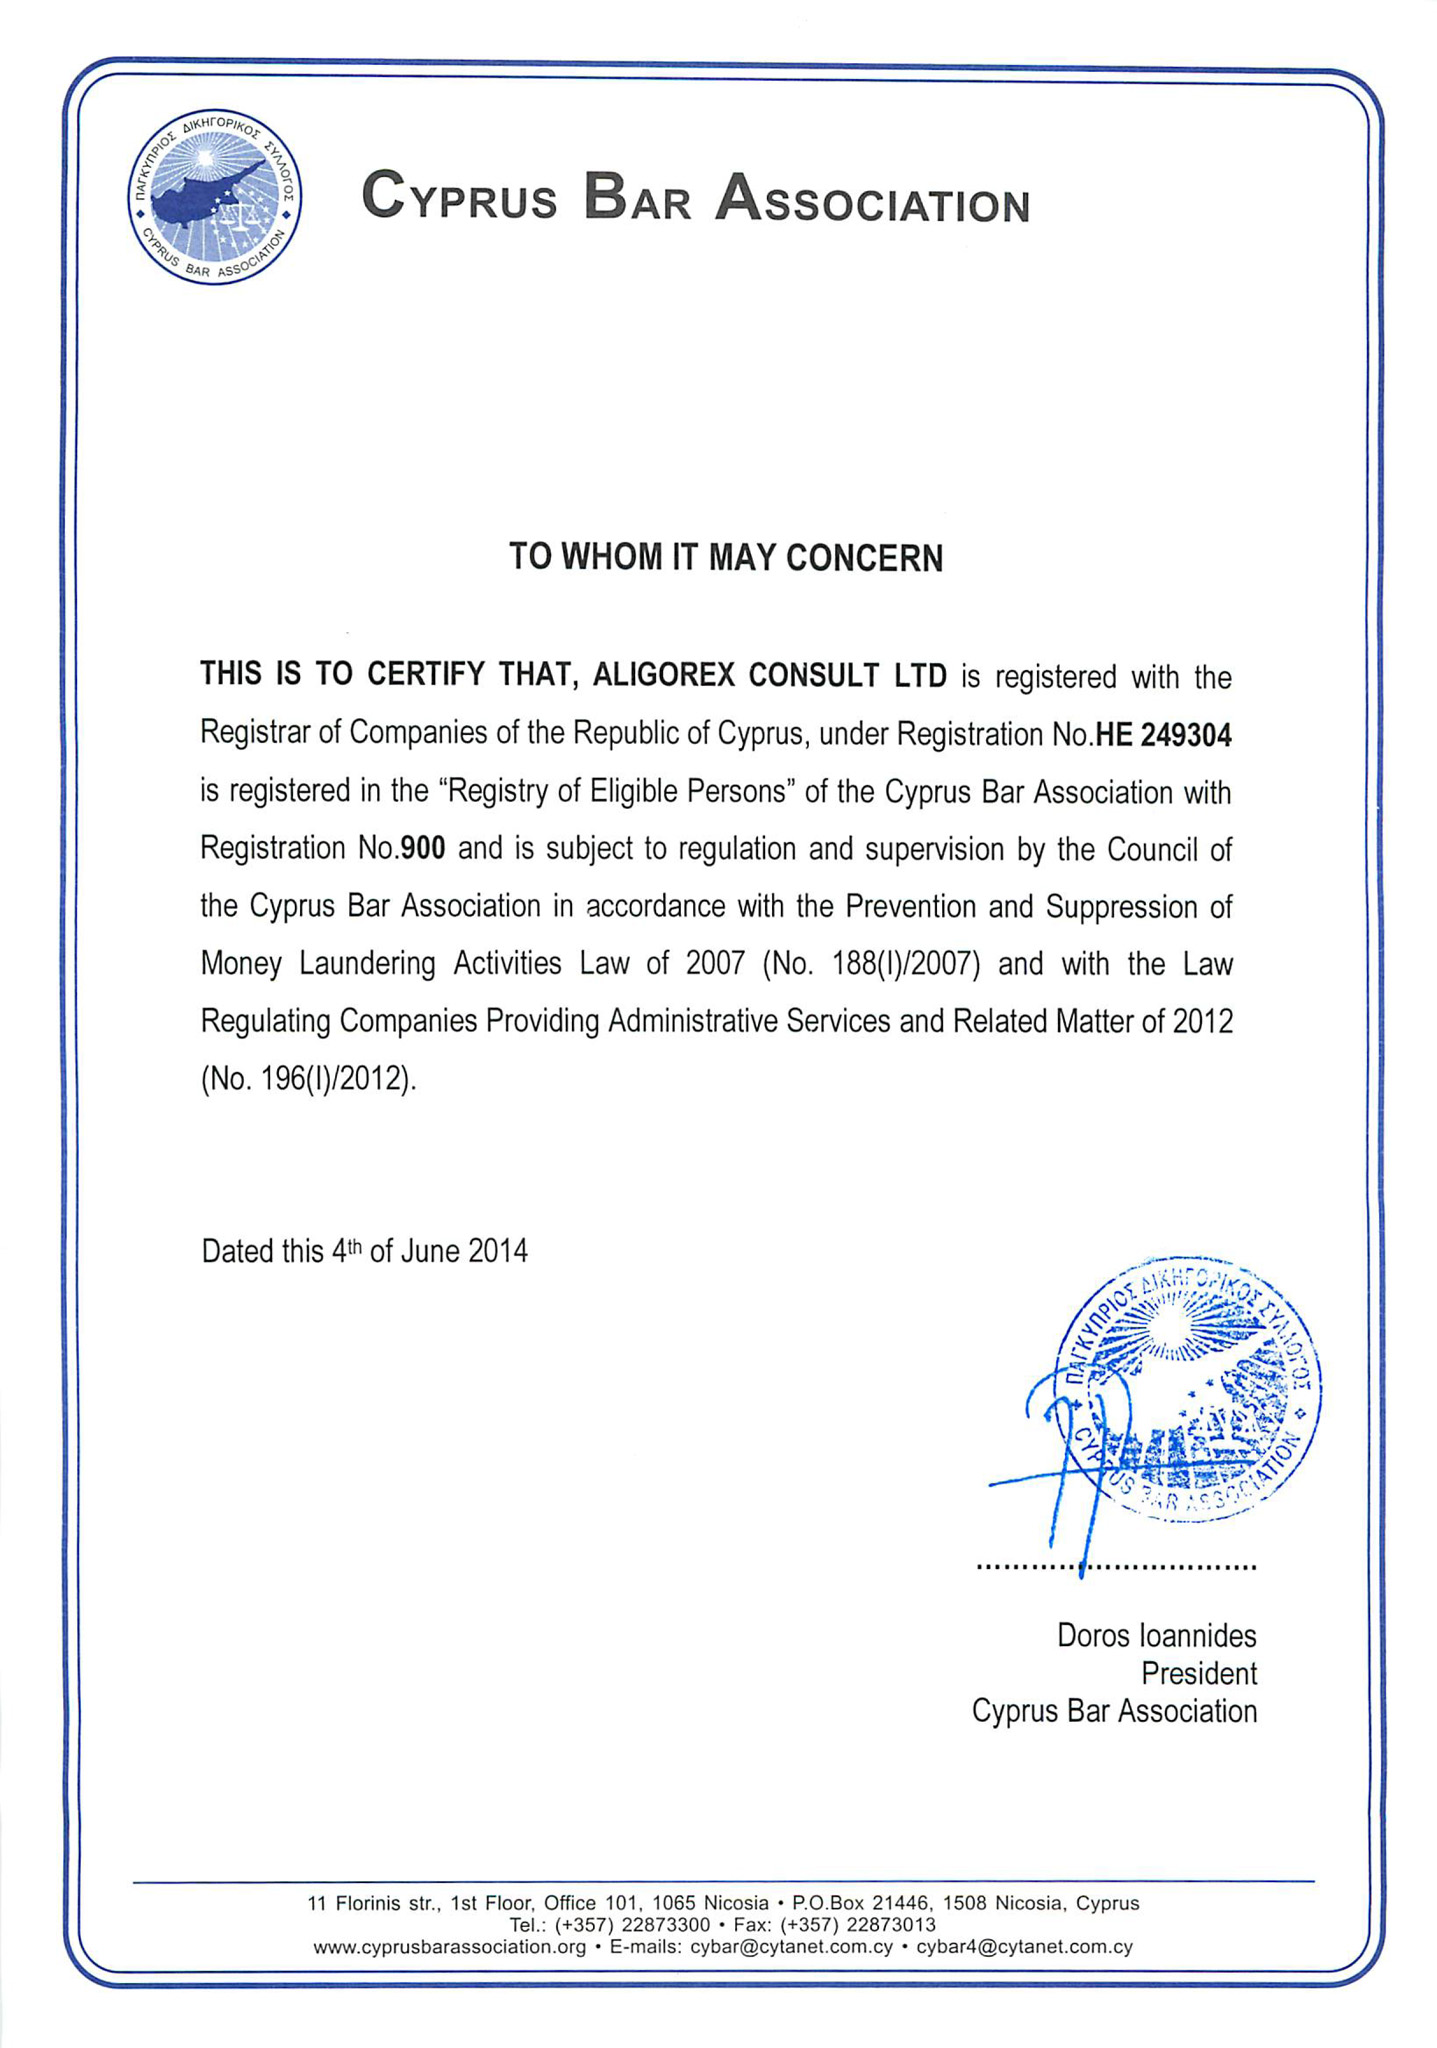 License Aligorex Consult signed by president of Cyprus Bar Association 